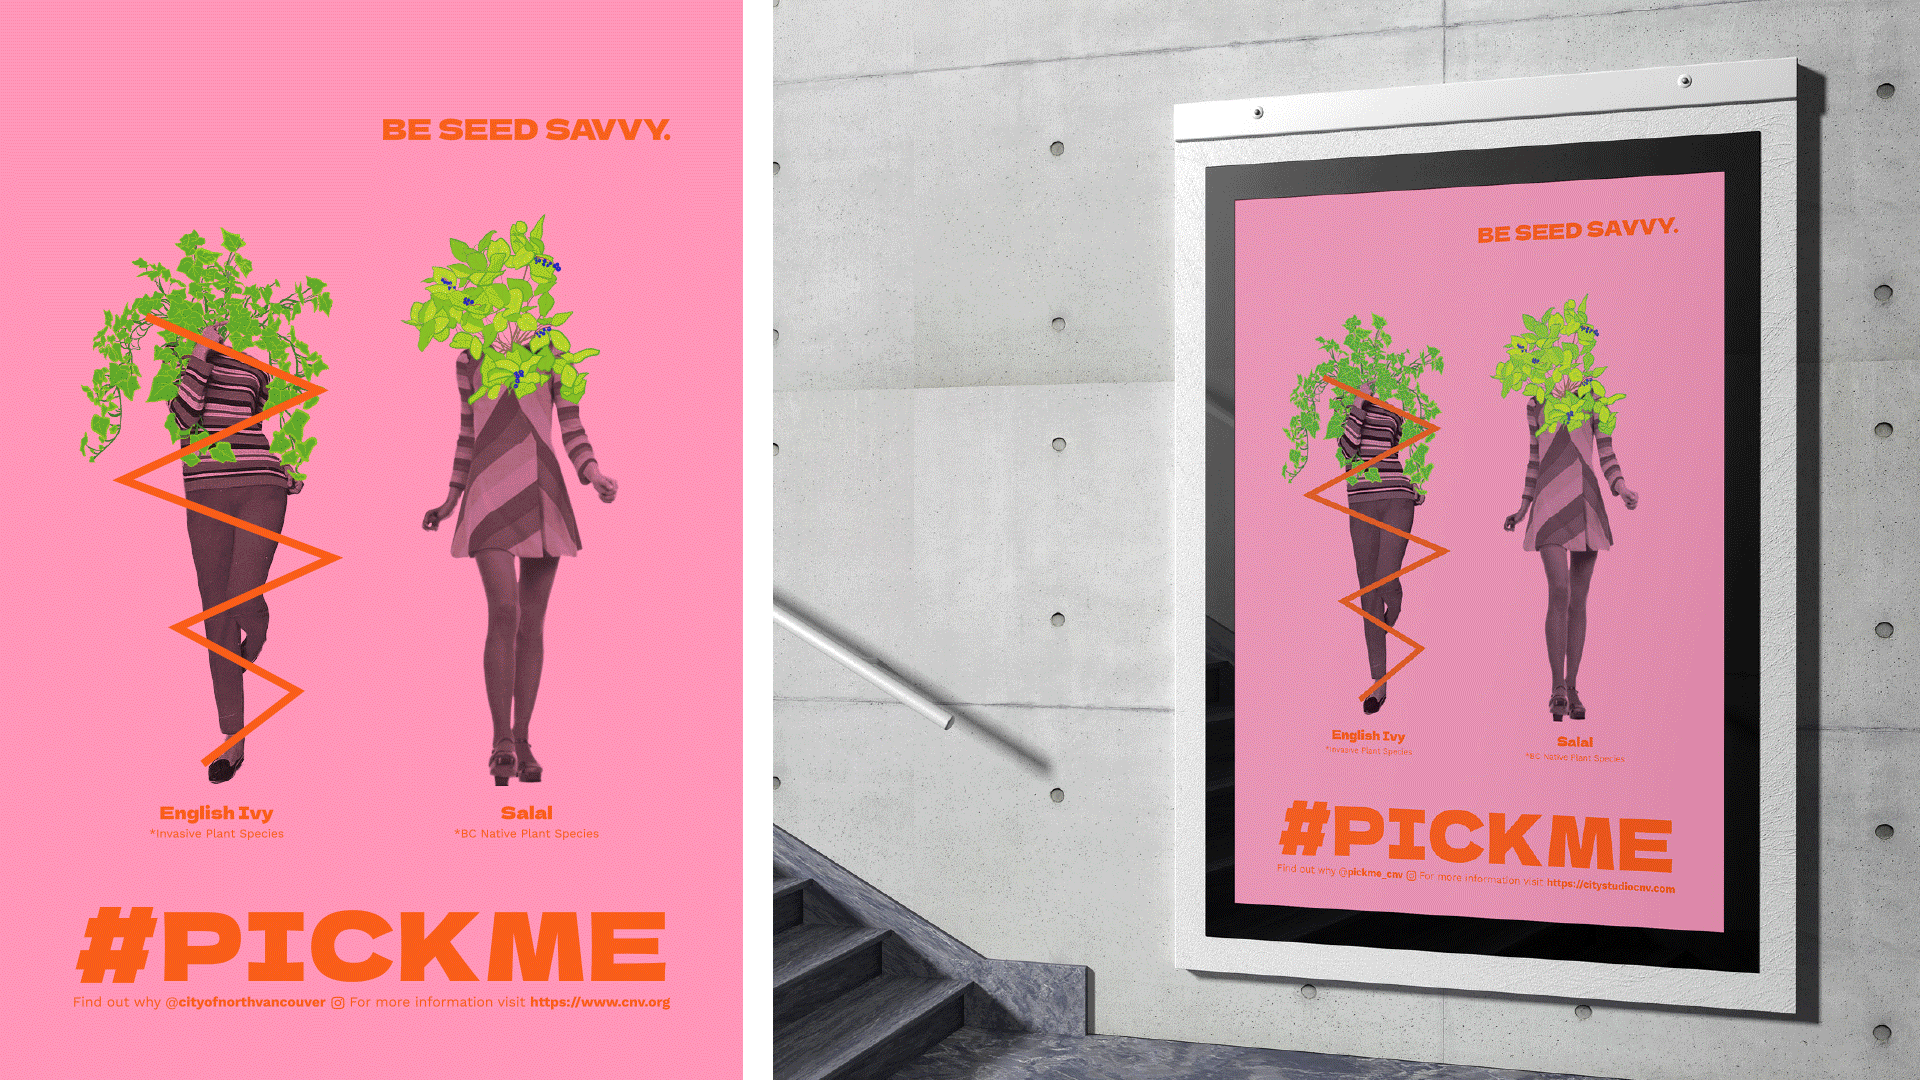 On the left, a GIF features the awareness campaign’s three flat poster designs, each comparing one invasive plant species to one B.C. native plant species. On the right, a GIF features the campaign’s poster designs in real life settings, as a transit poster, a bus shelter ad, and a plant nursery’s storefront signage.